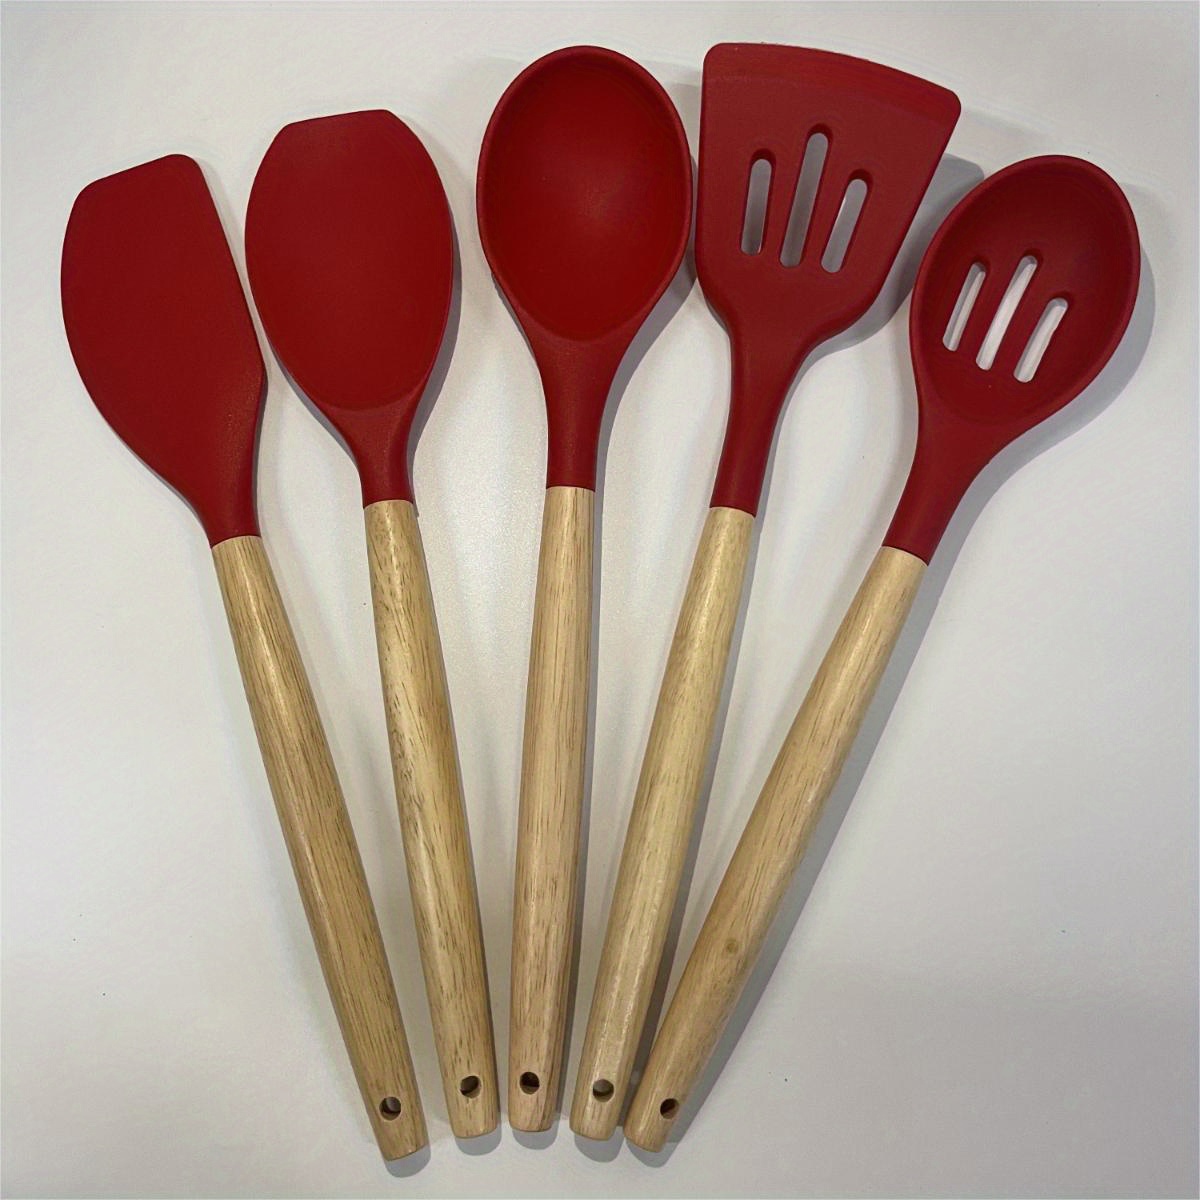 Christmas Silicone Spatula with Utensil Holder , Red/5 Piece Set